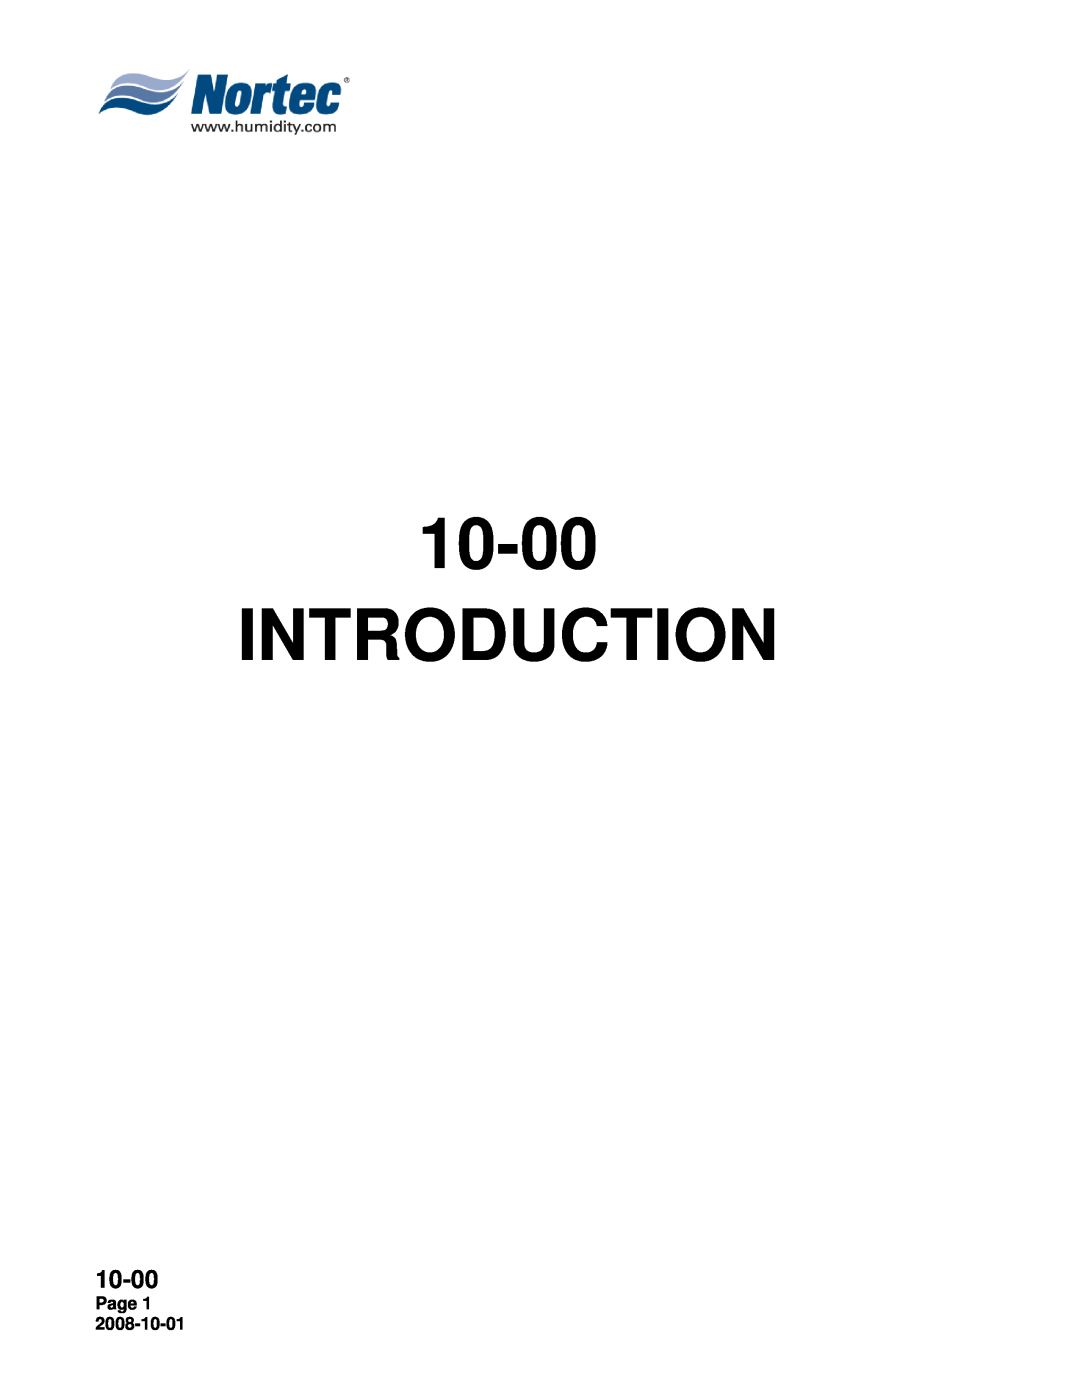 Nortec Industries NH Series installation manual Introduction, 10-00, Page 